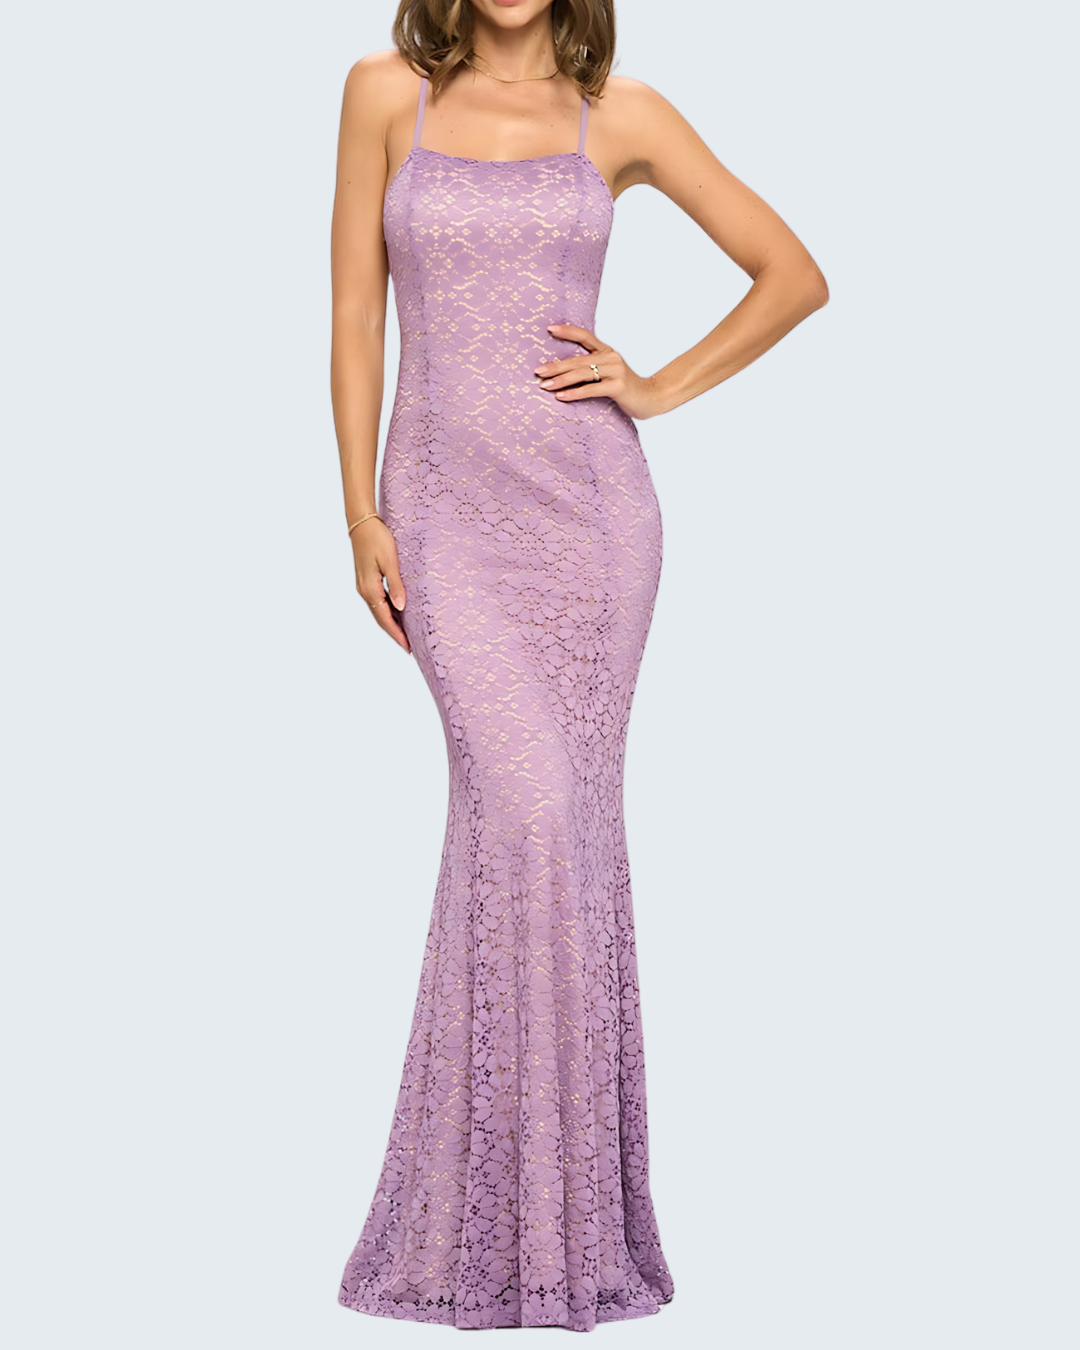 Intricate Lace Mermaid Gown with Open Back Detail - Lavender